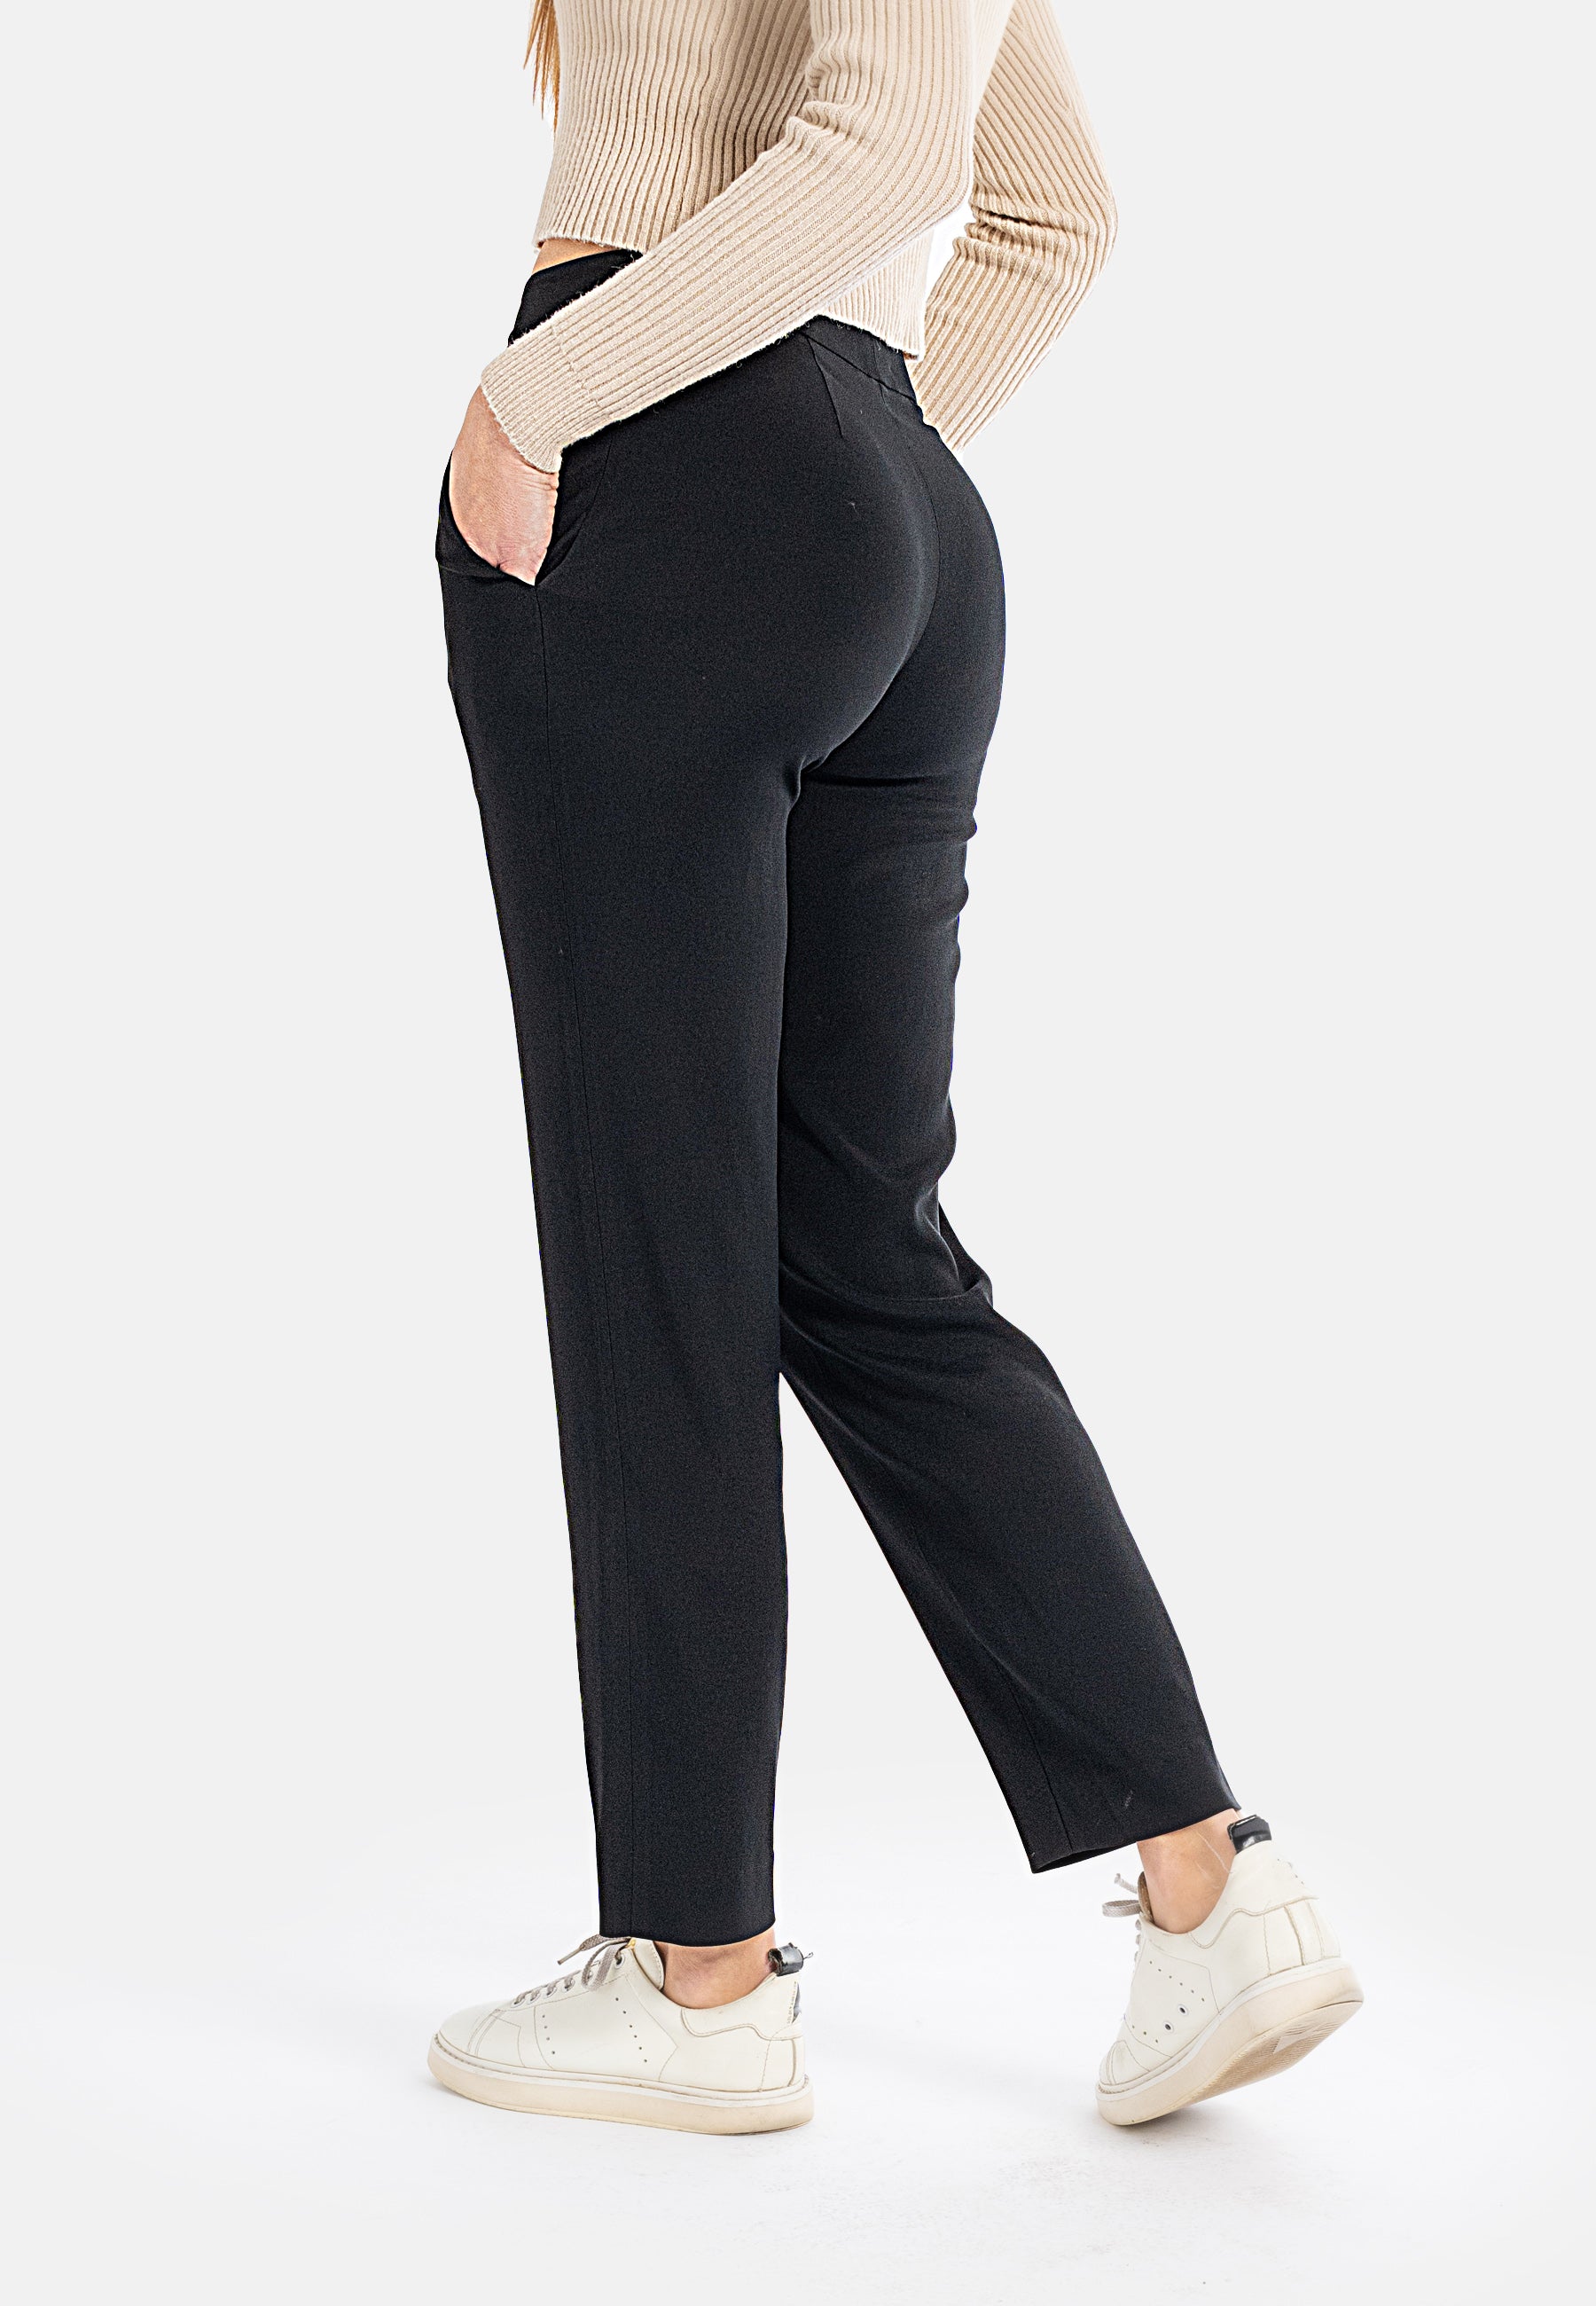 black pants ankle length pants women's ankle length pants ladies work pants with pockets australia black pants  women black pants black trousers for women black trousers designer pants black pants with pockets  black office pants for ladies designer pants for women